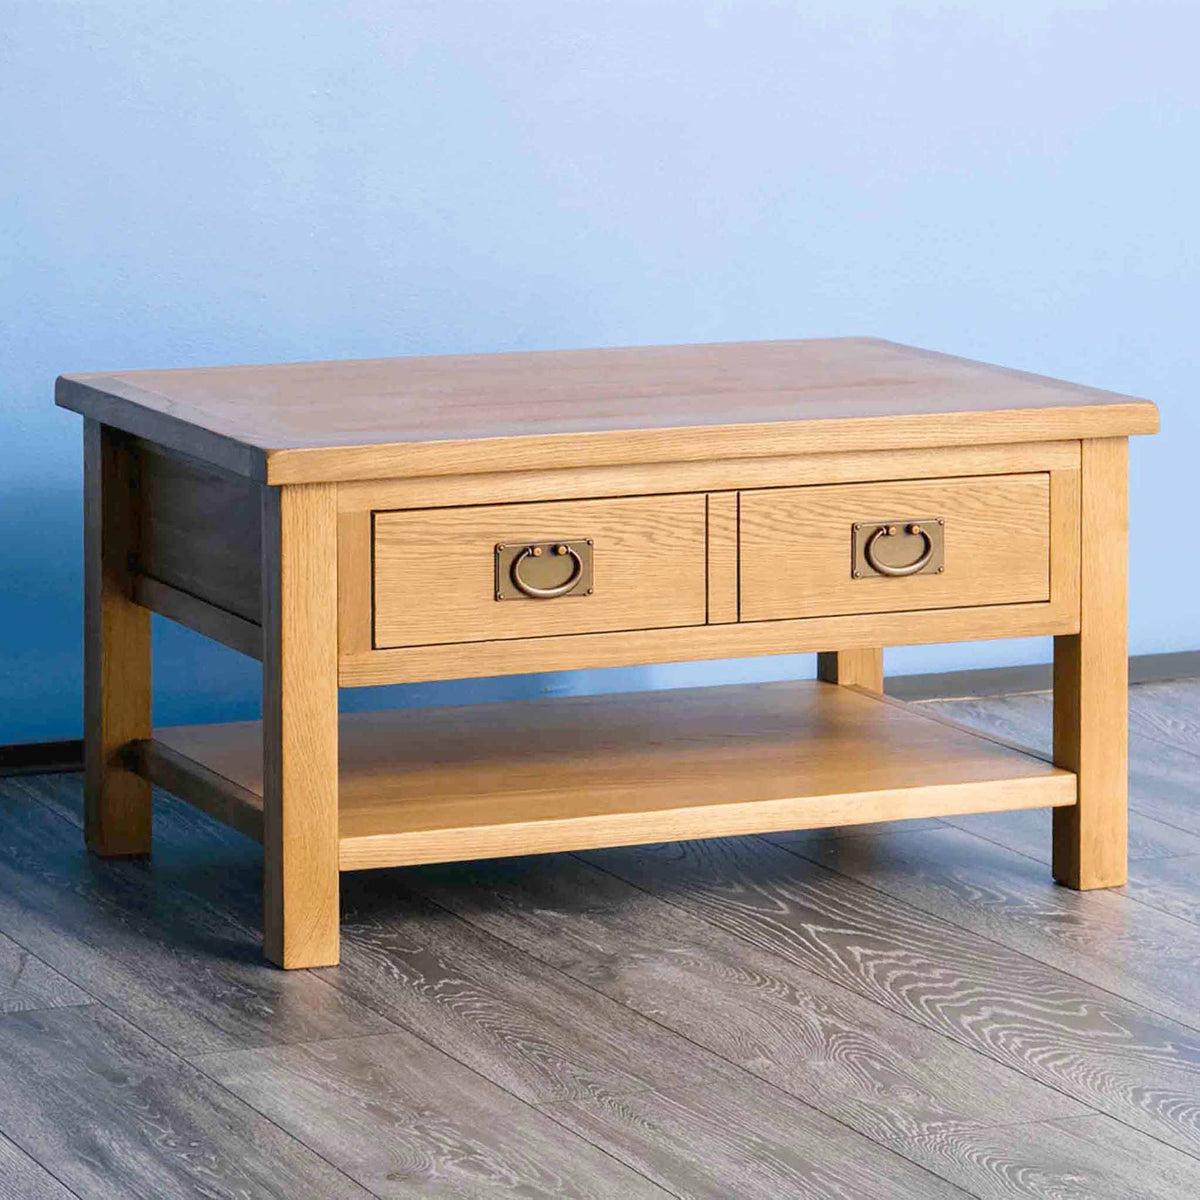 Surrey Oak Coffee Table - Lifestyle side view